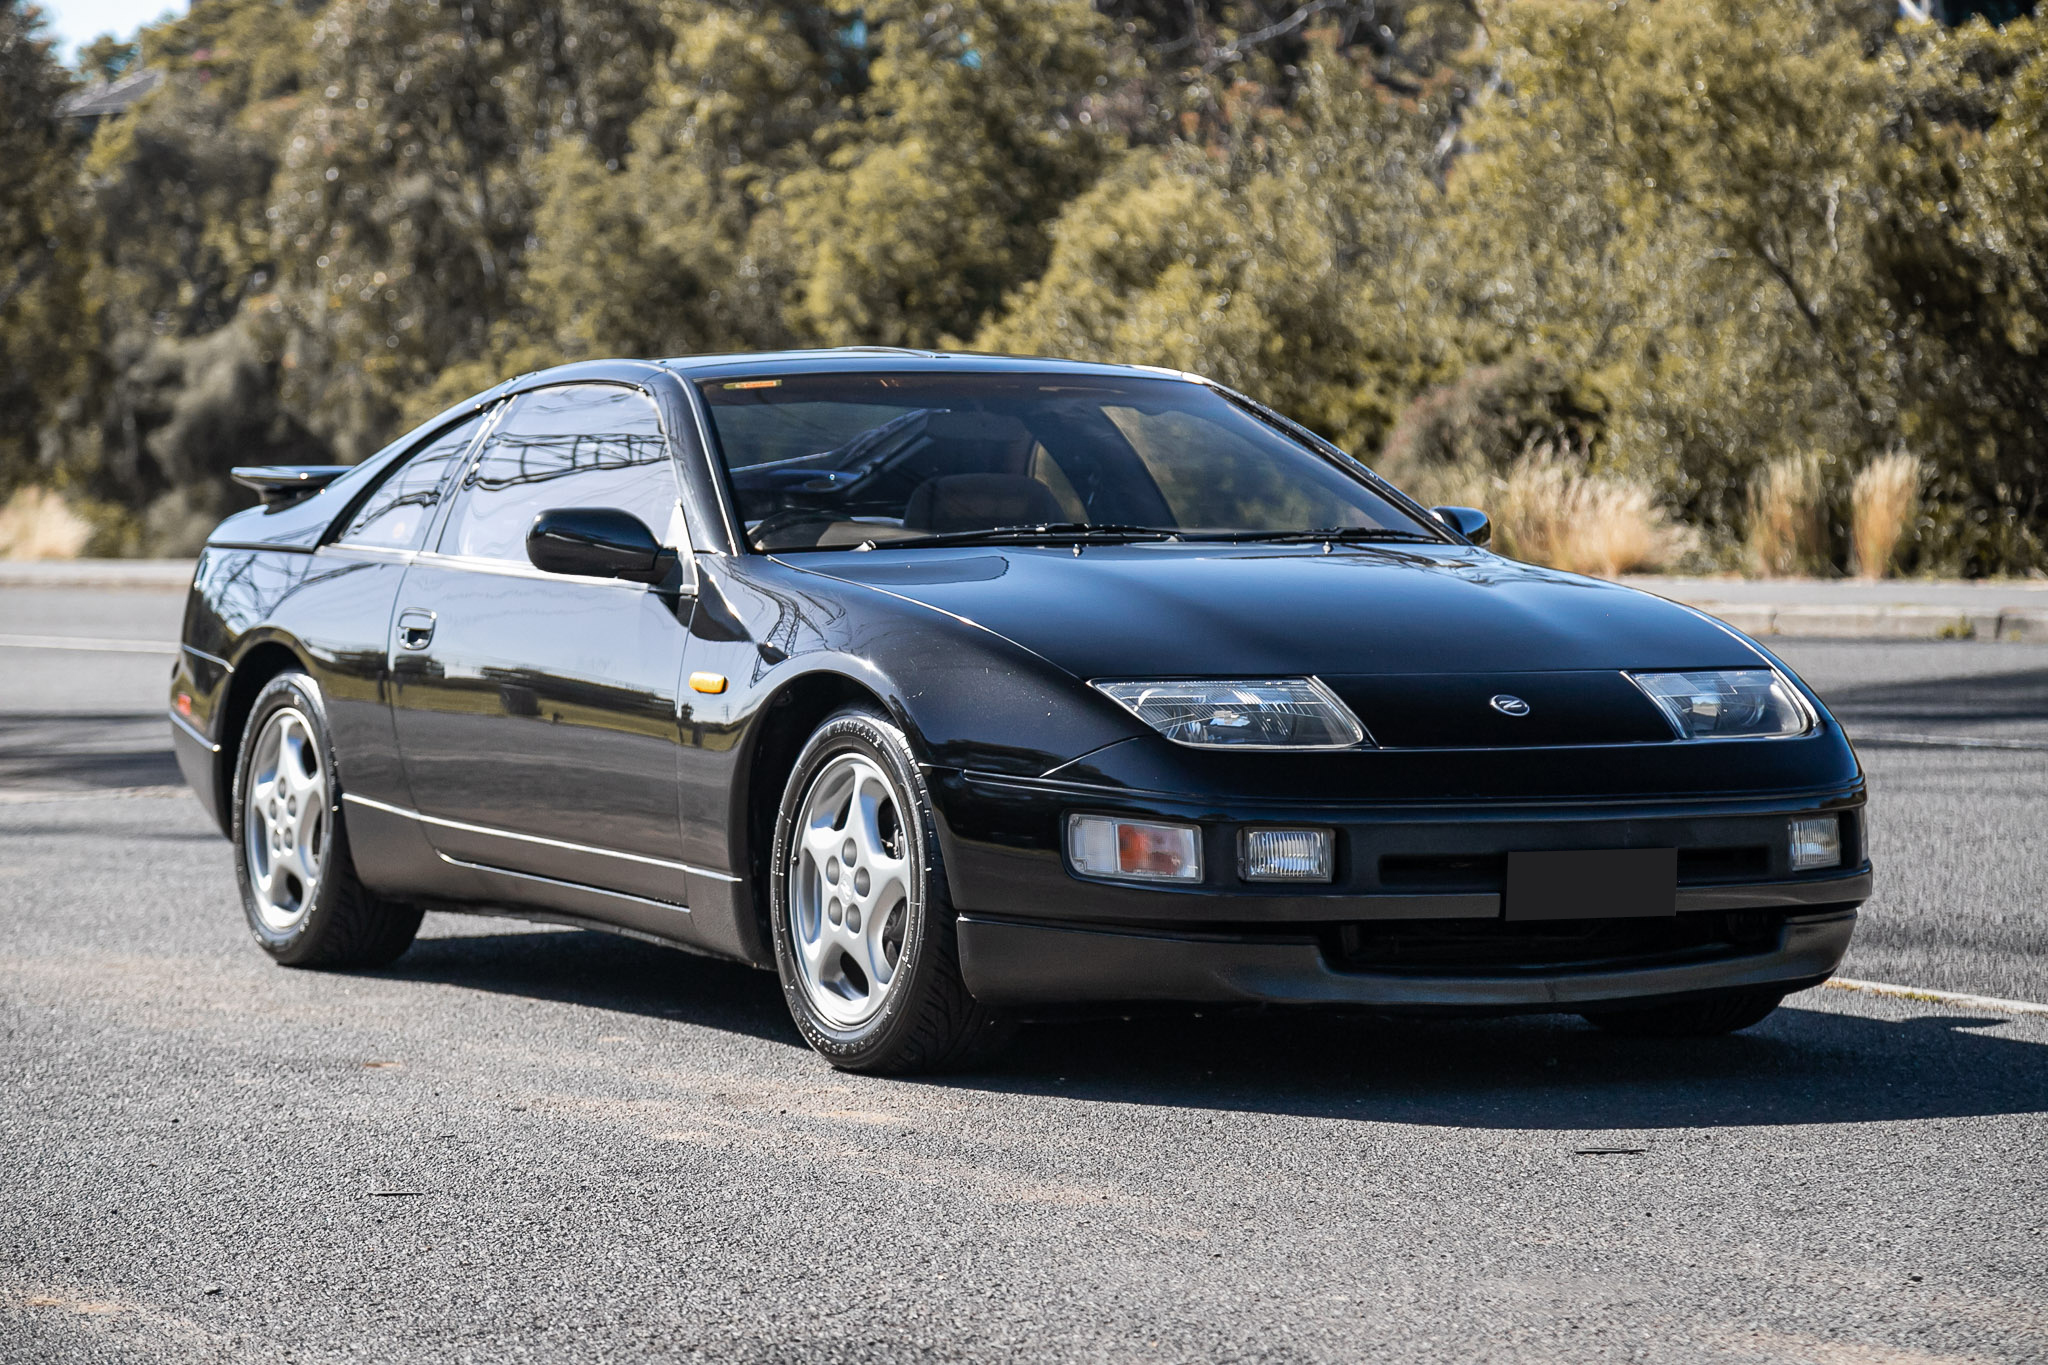 1990 NISSAN 300ZX - 21,200 KM for sale by auction in Toorak, VIC 